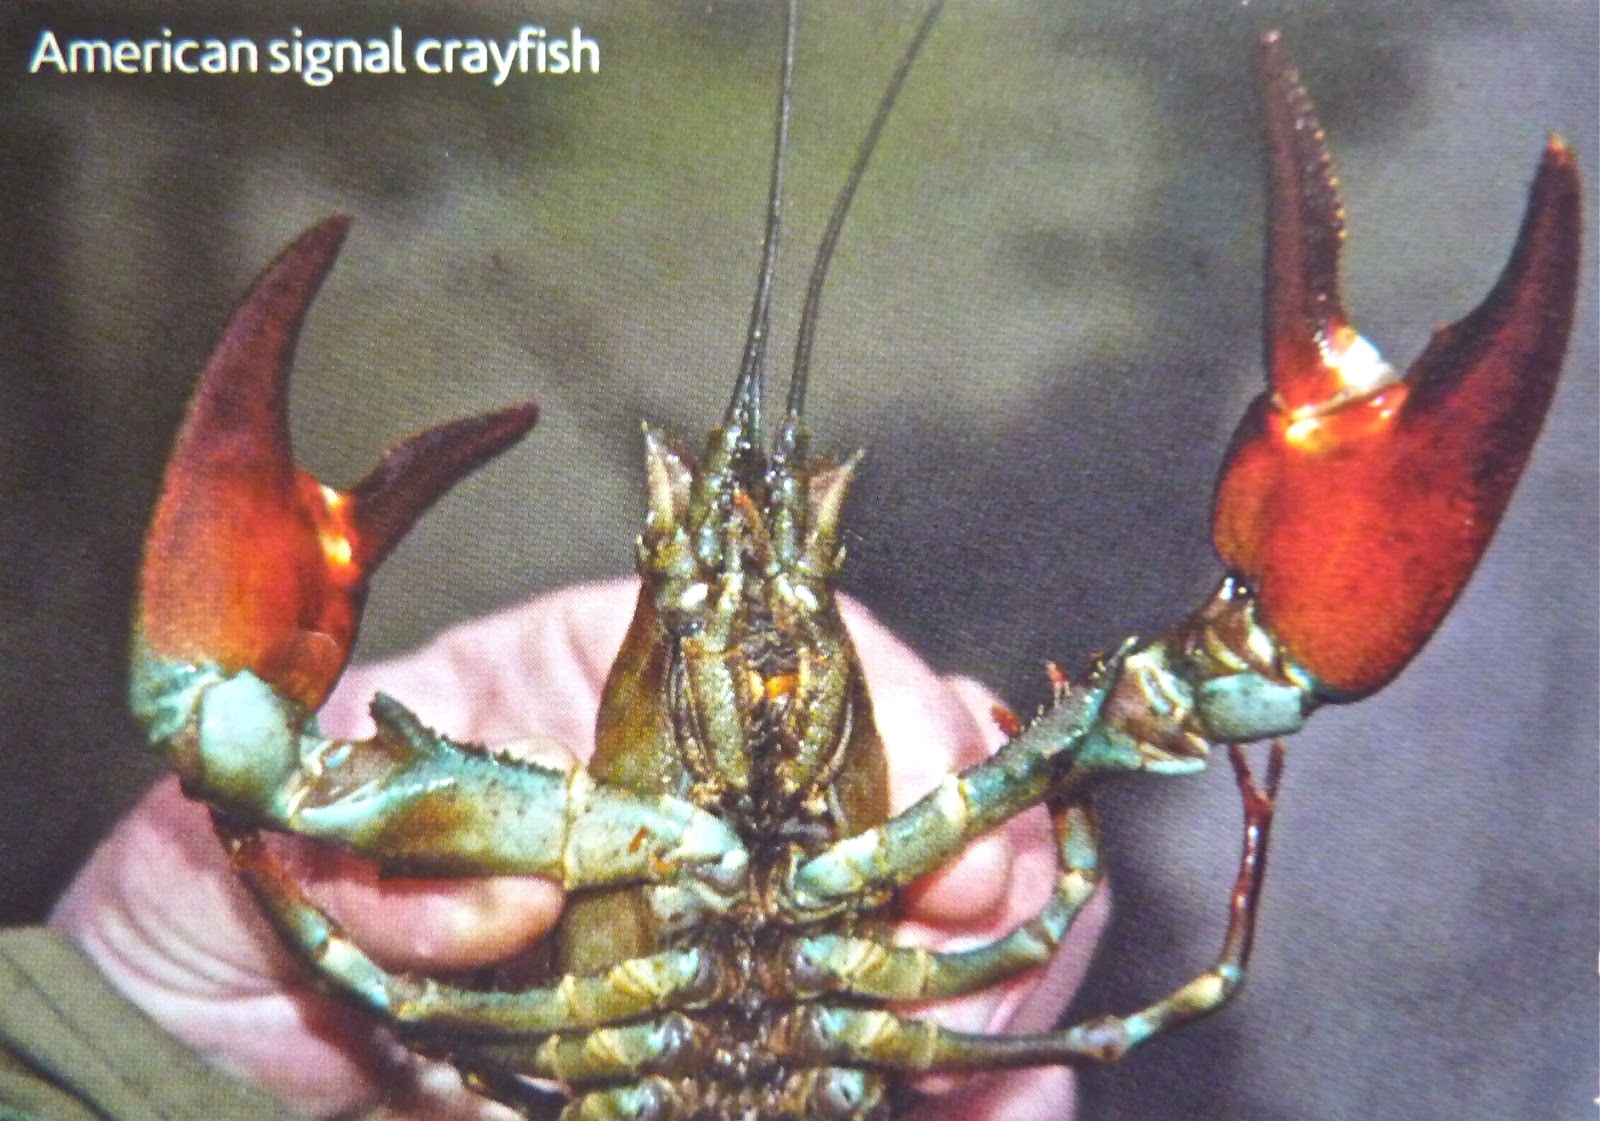 Signal crayfishexplosion means significant loss of fish eggs.